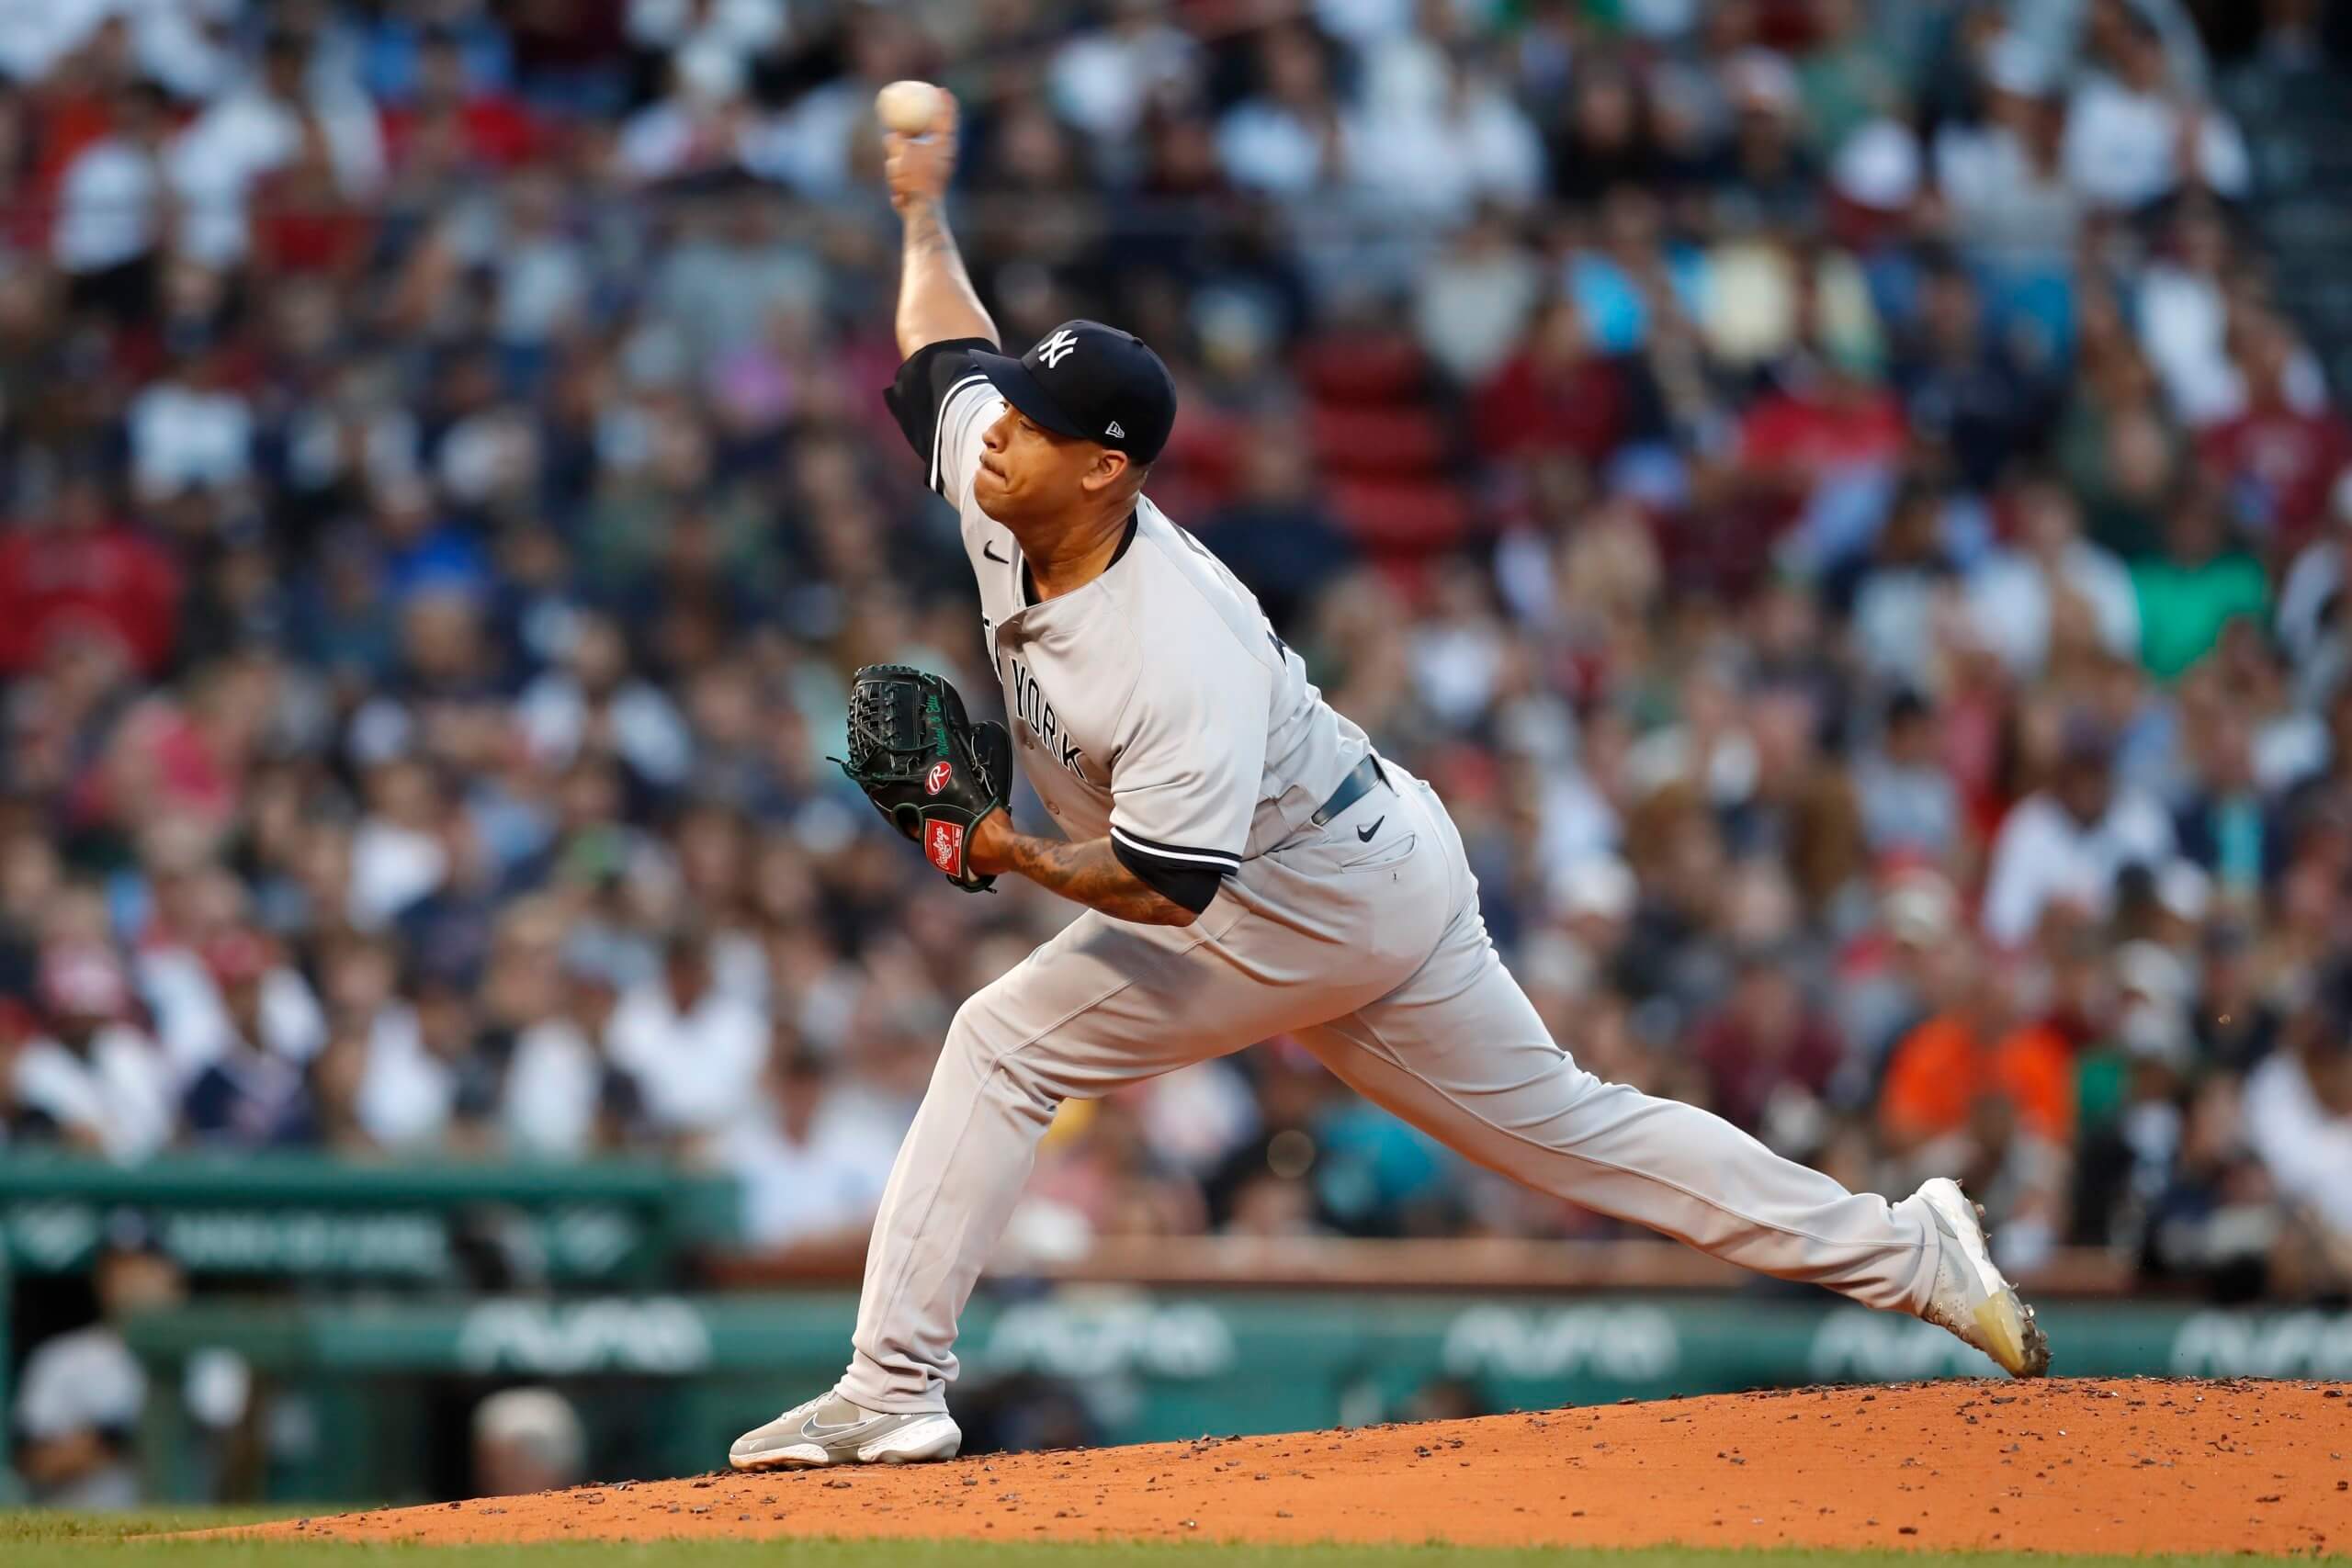 Yankees' Frankie Montas has chance to pitch this season after